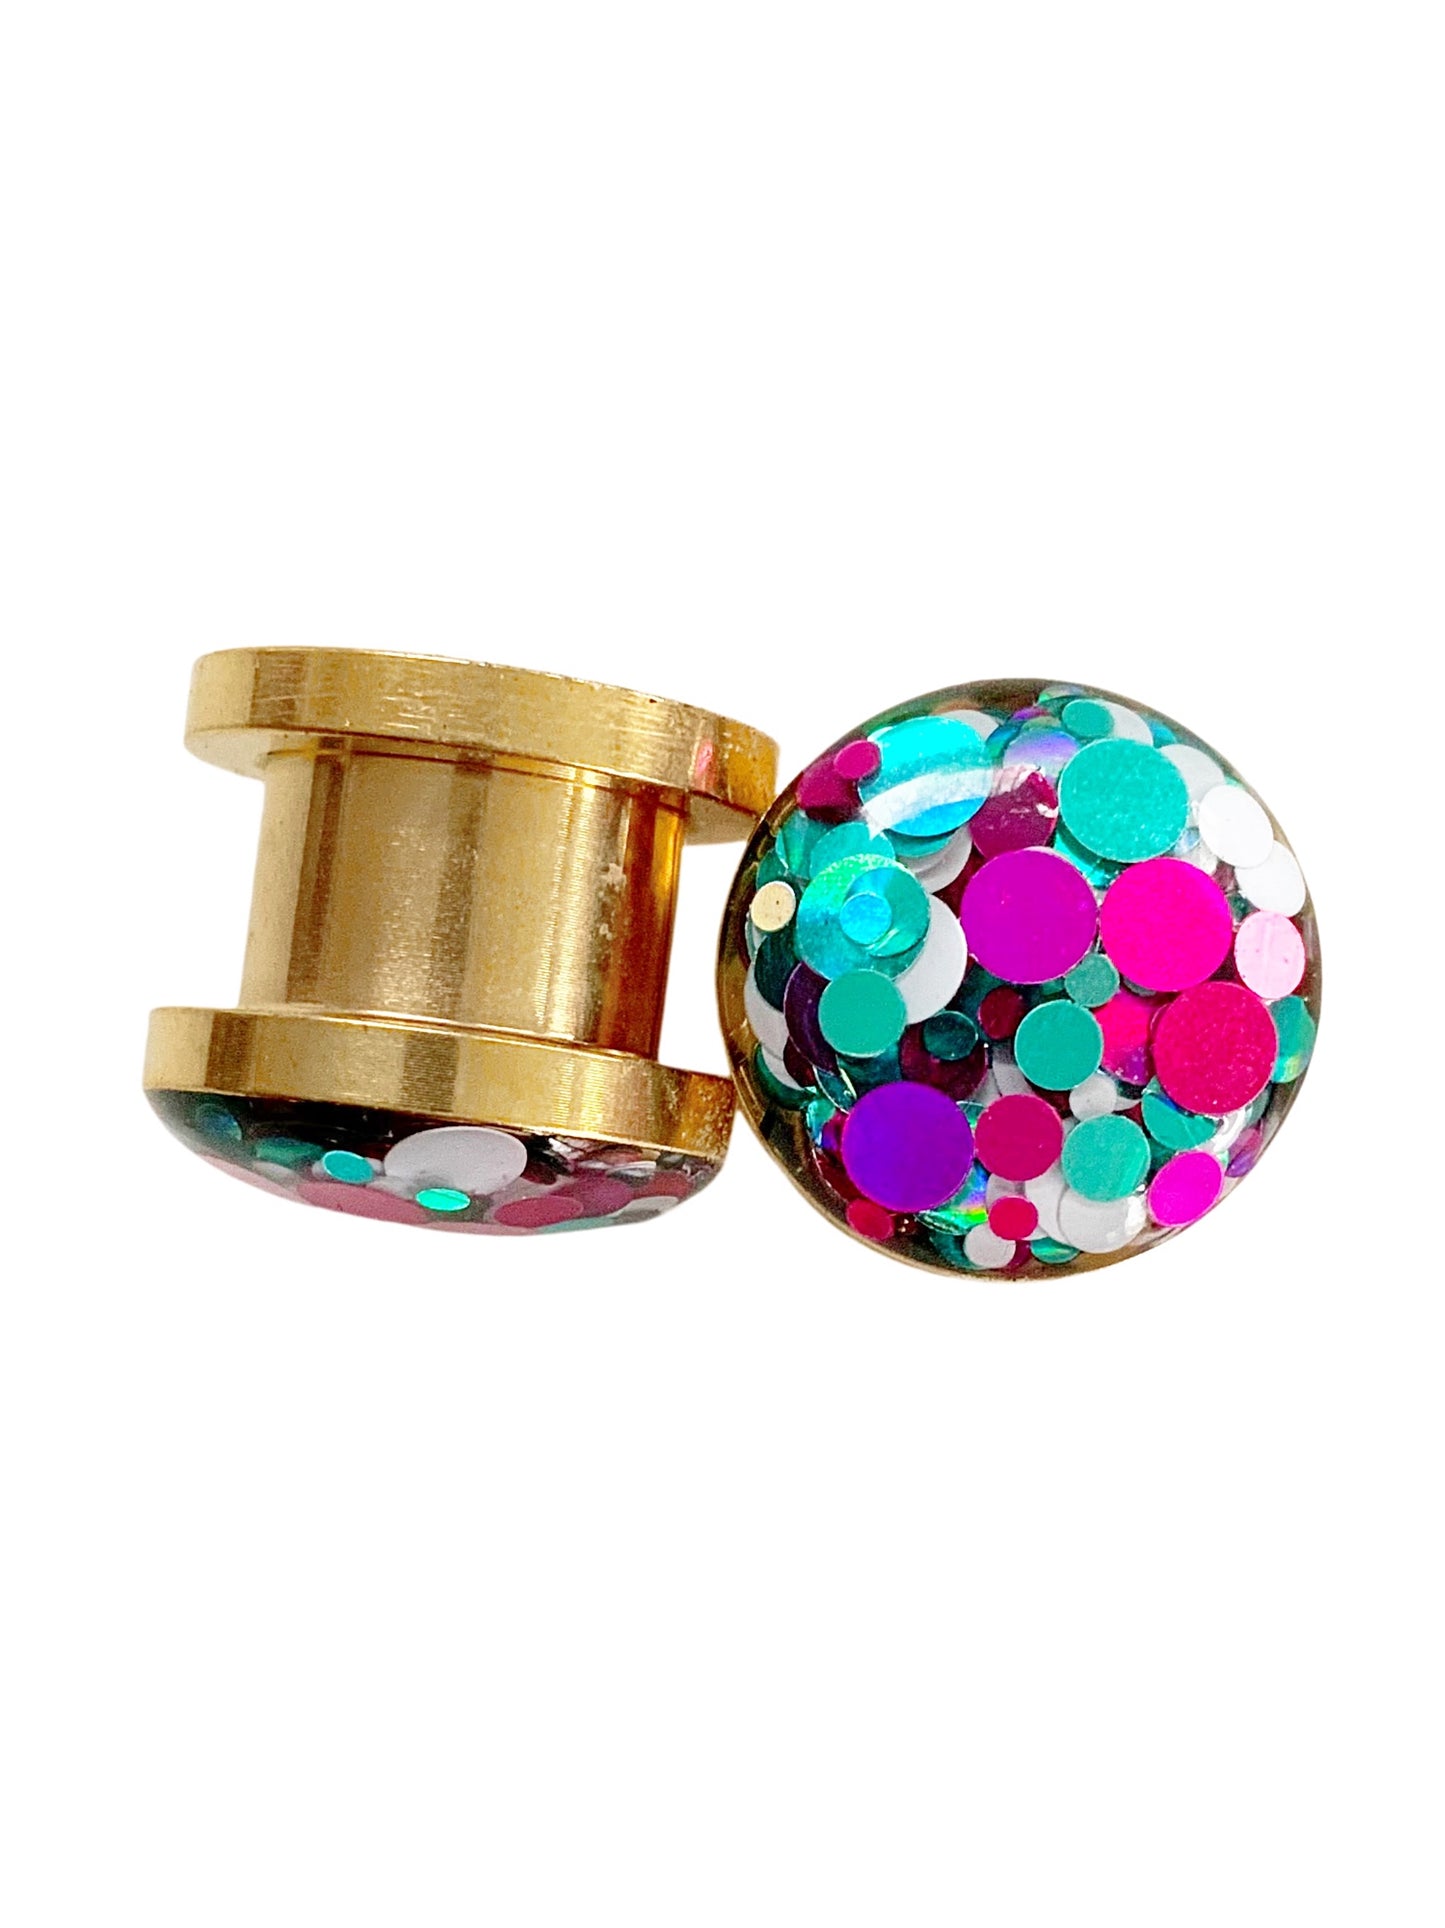 Mermaid Teal and Pink Party Bubble Plugs